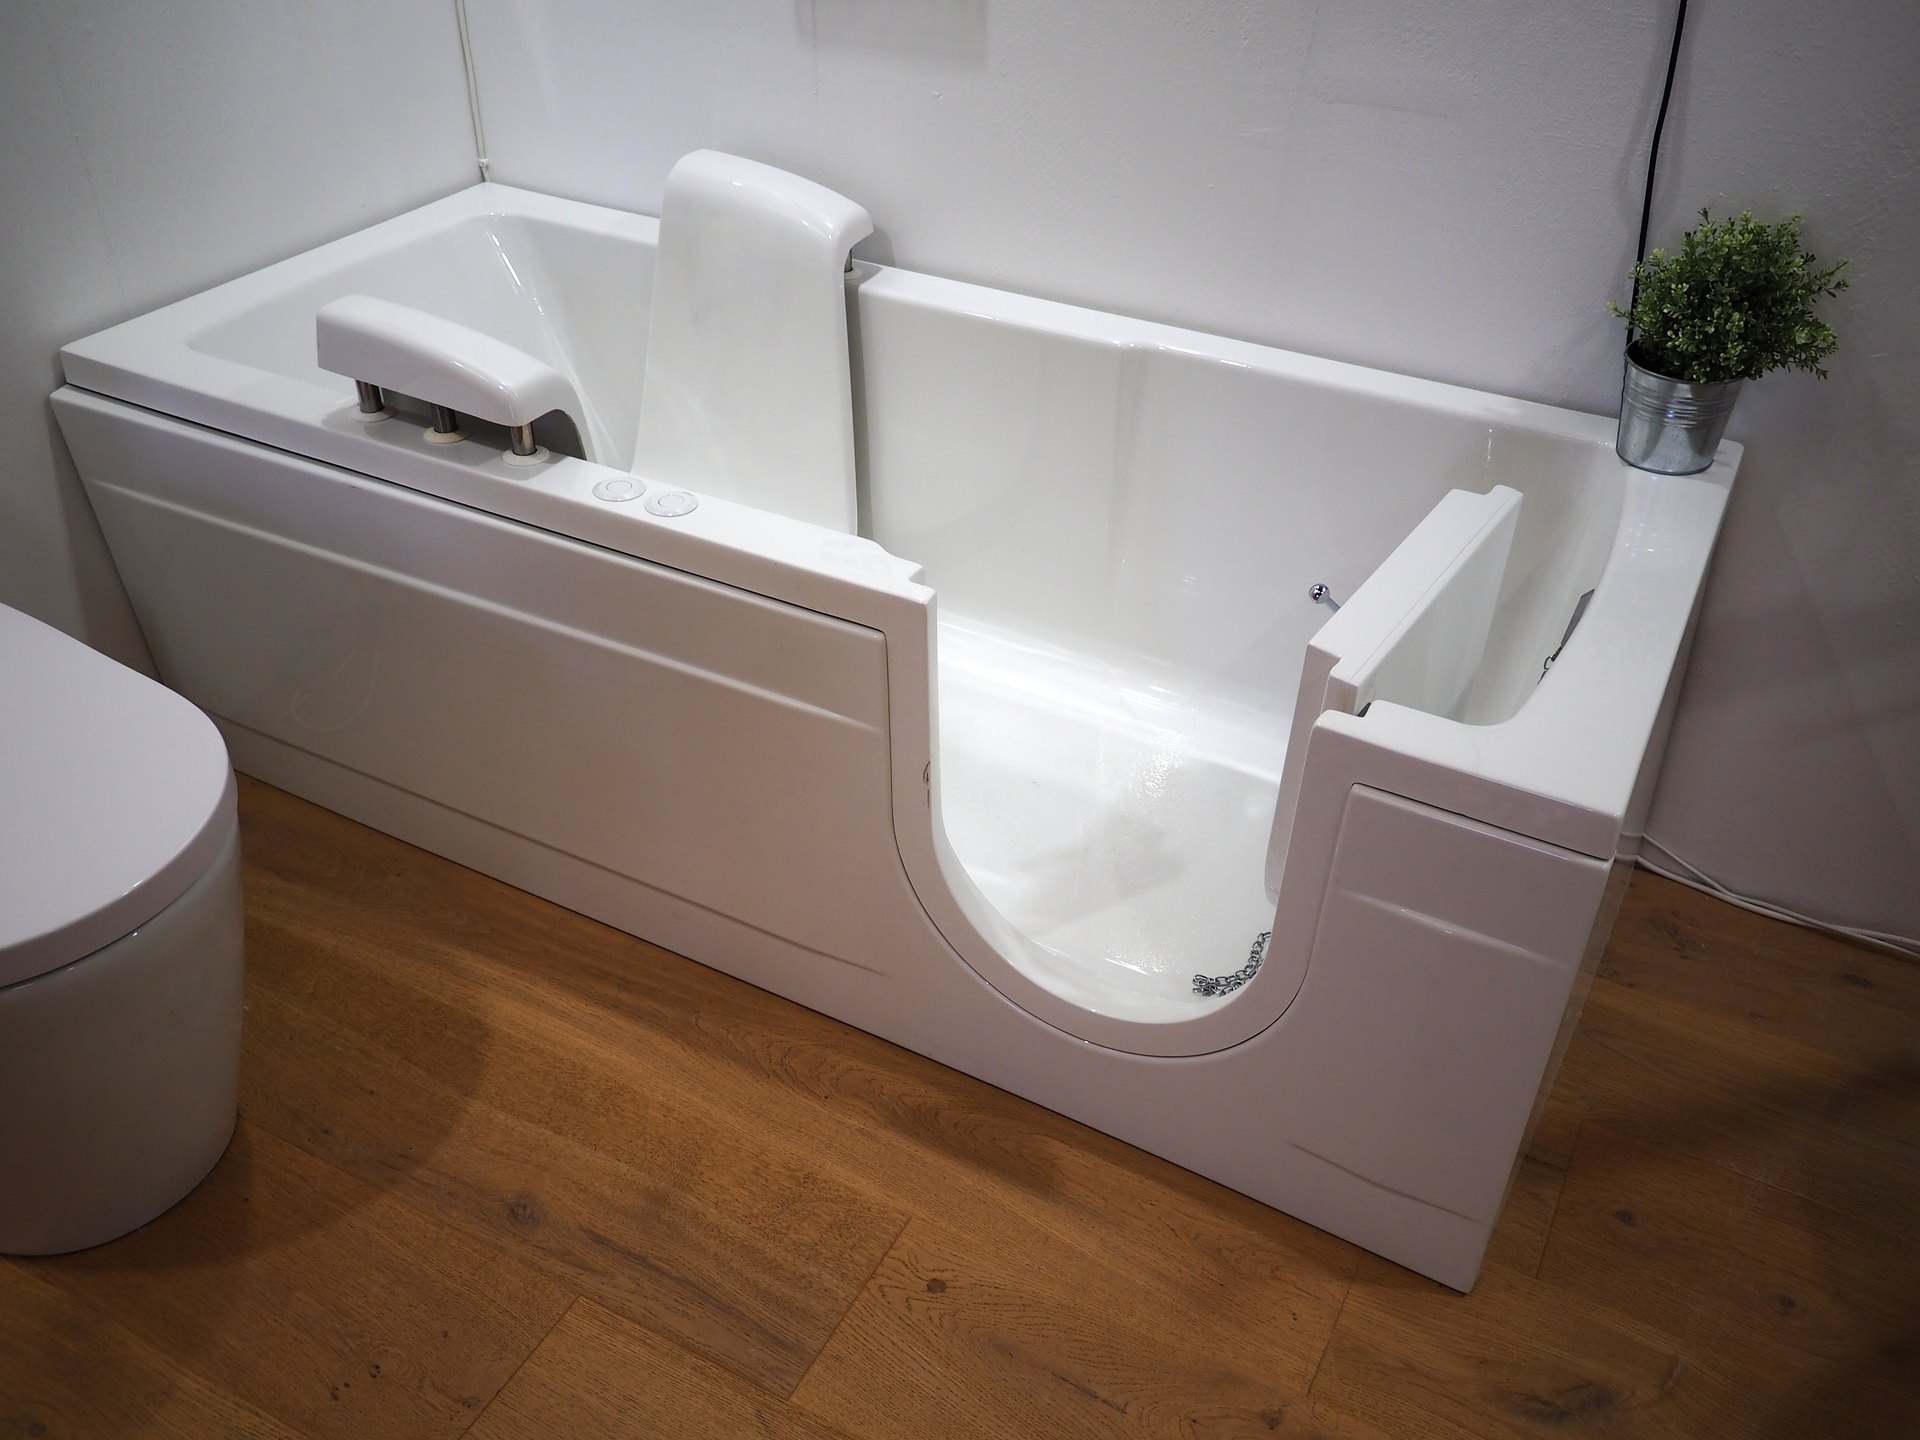 accessible bathtub in bathroom with wood floors next to toilet